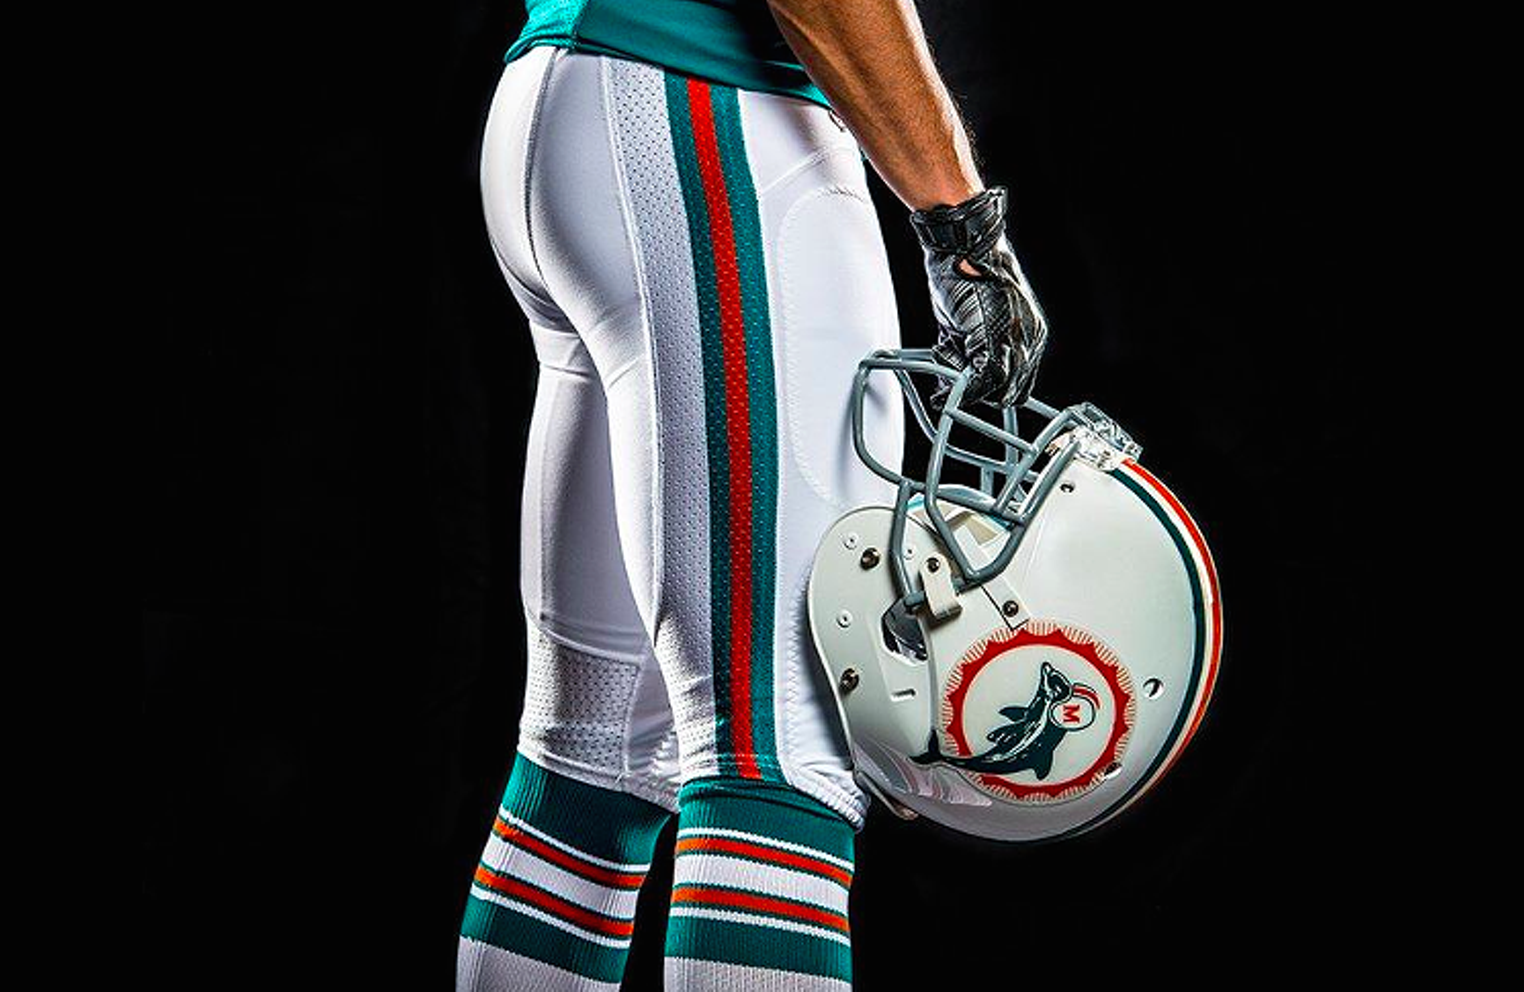 dolphins throwback